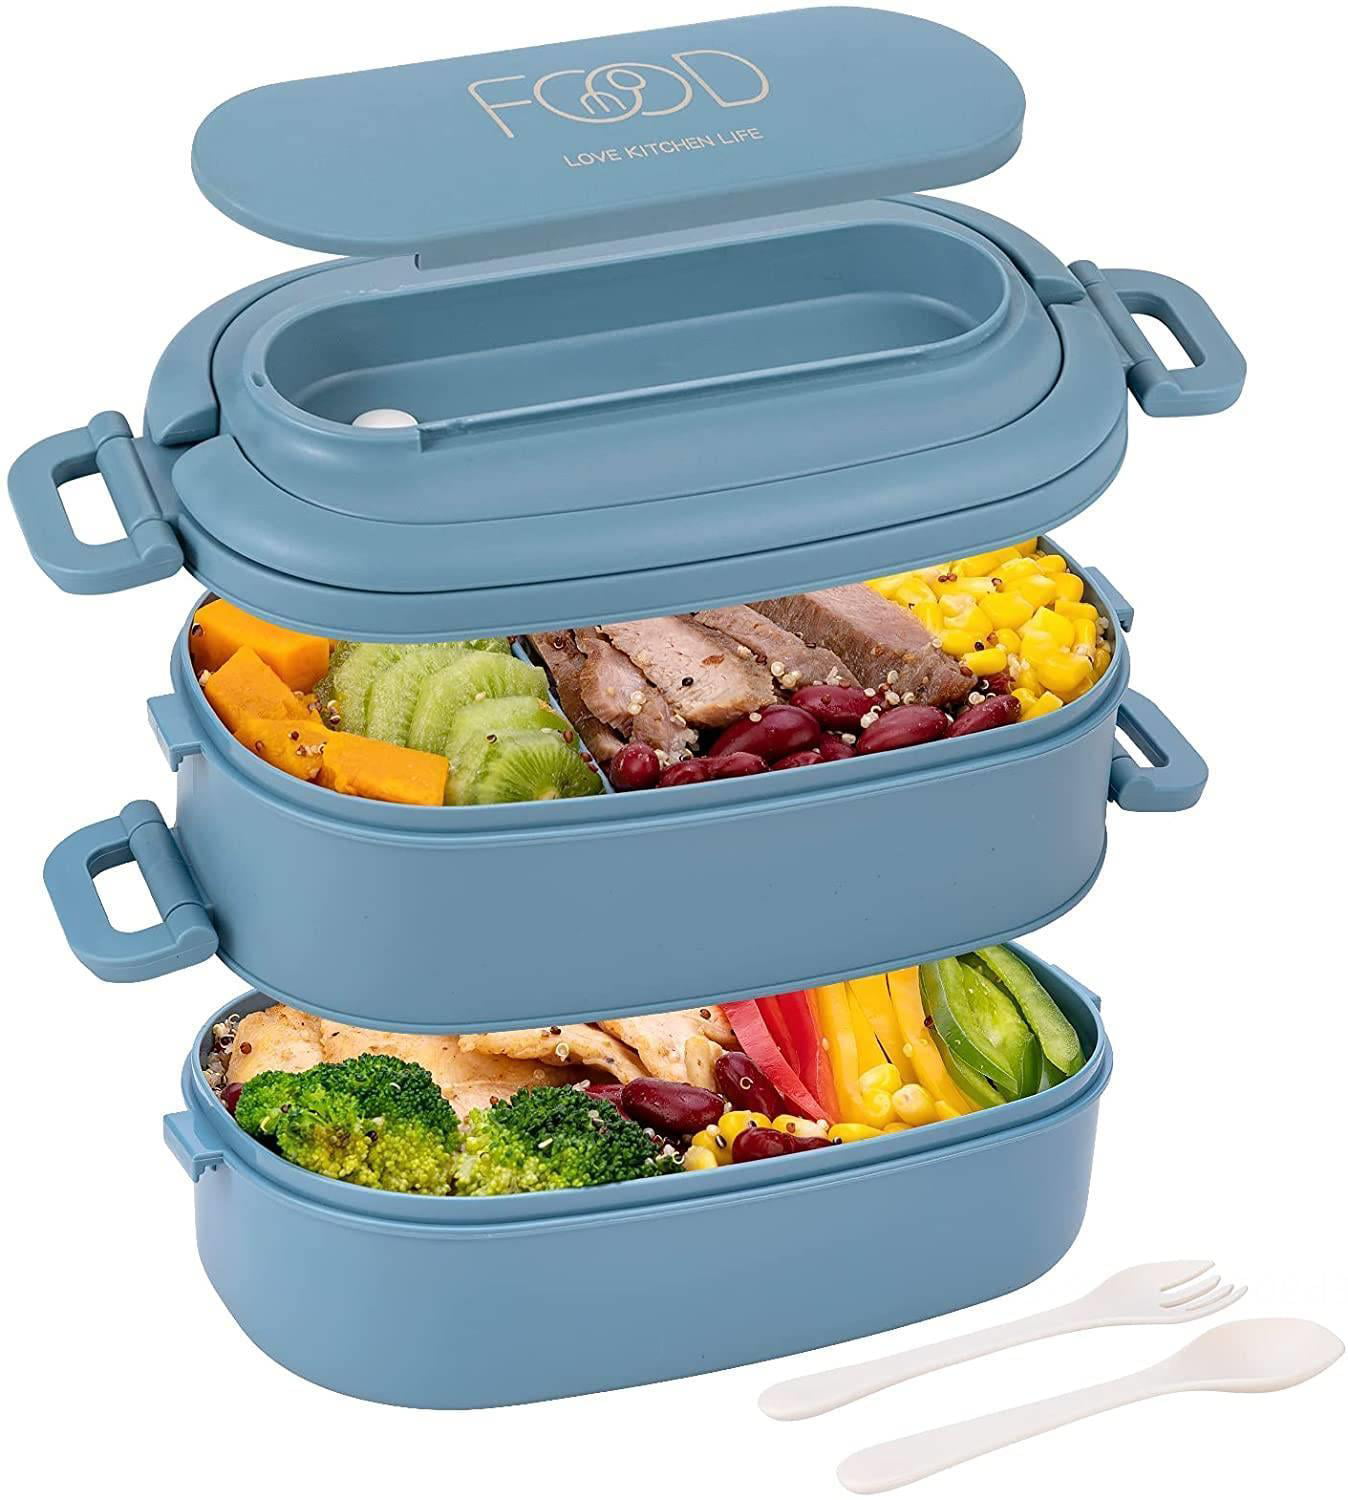 Thicken Stainless Steel Stackable Bento Lunch Box Adult Japanese Bento Box  School Camping Food Container For Kids Portable Picnic Tiffin Box T200902  From Xue009, $14.79